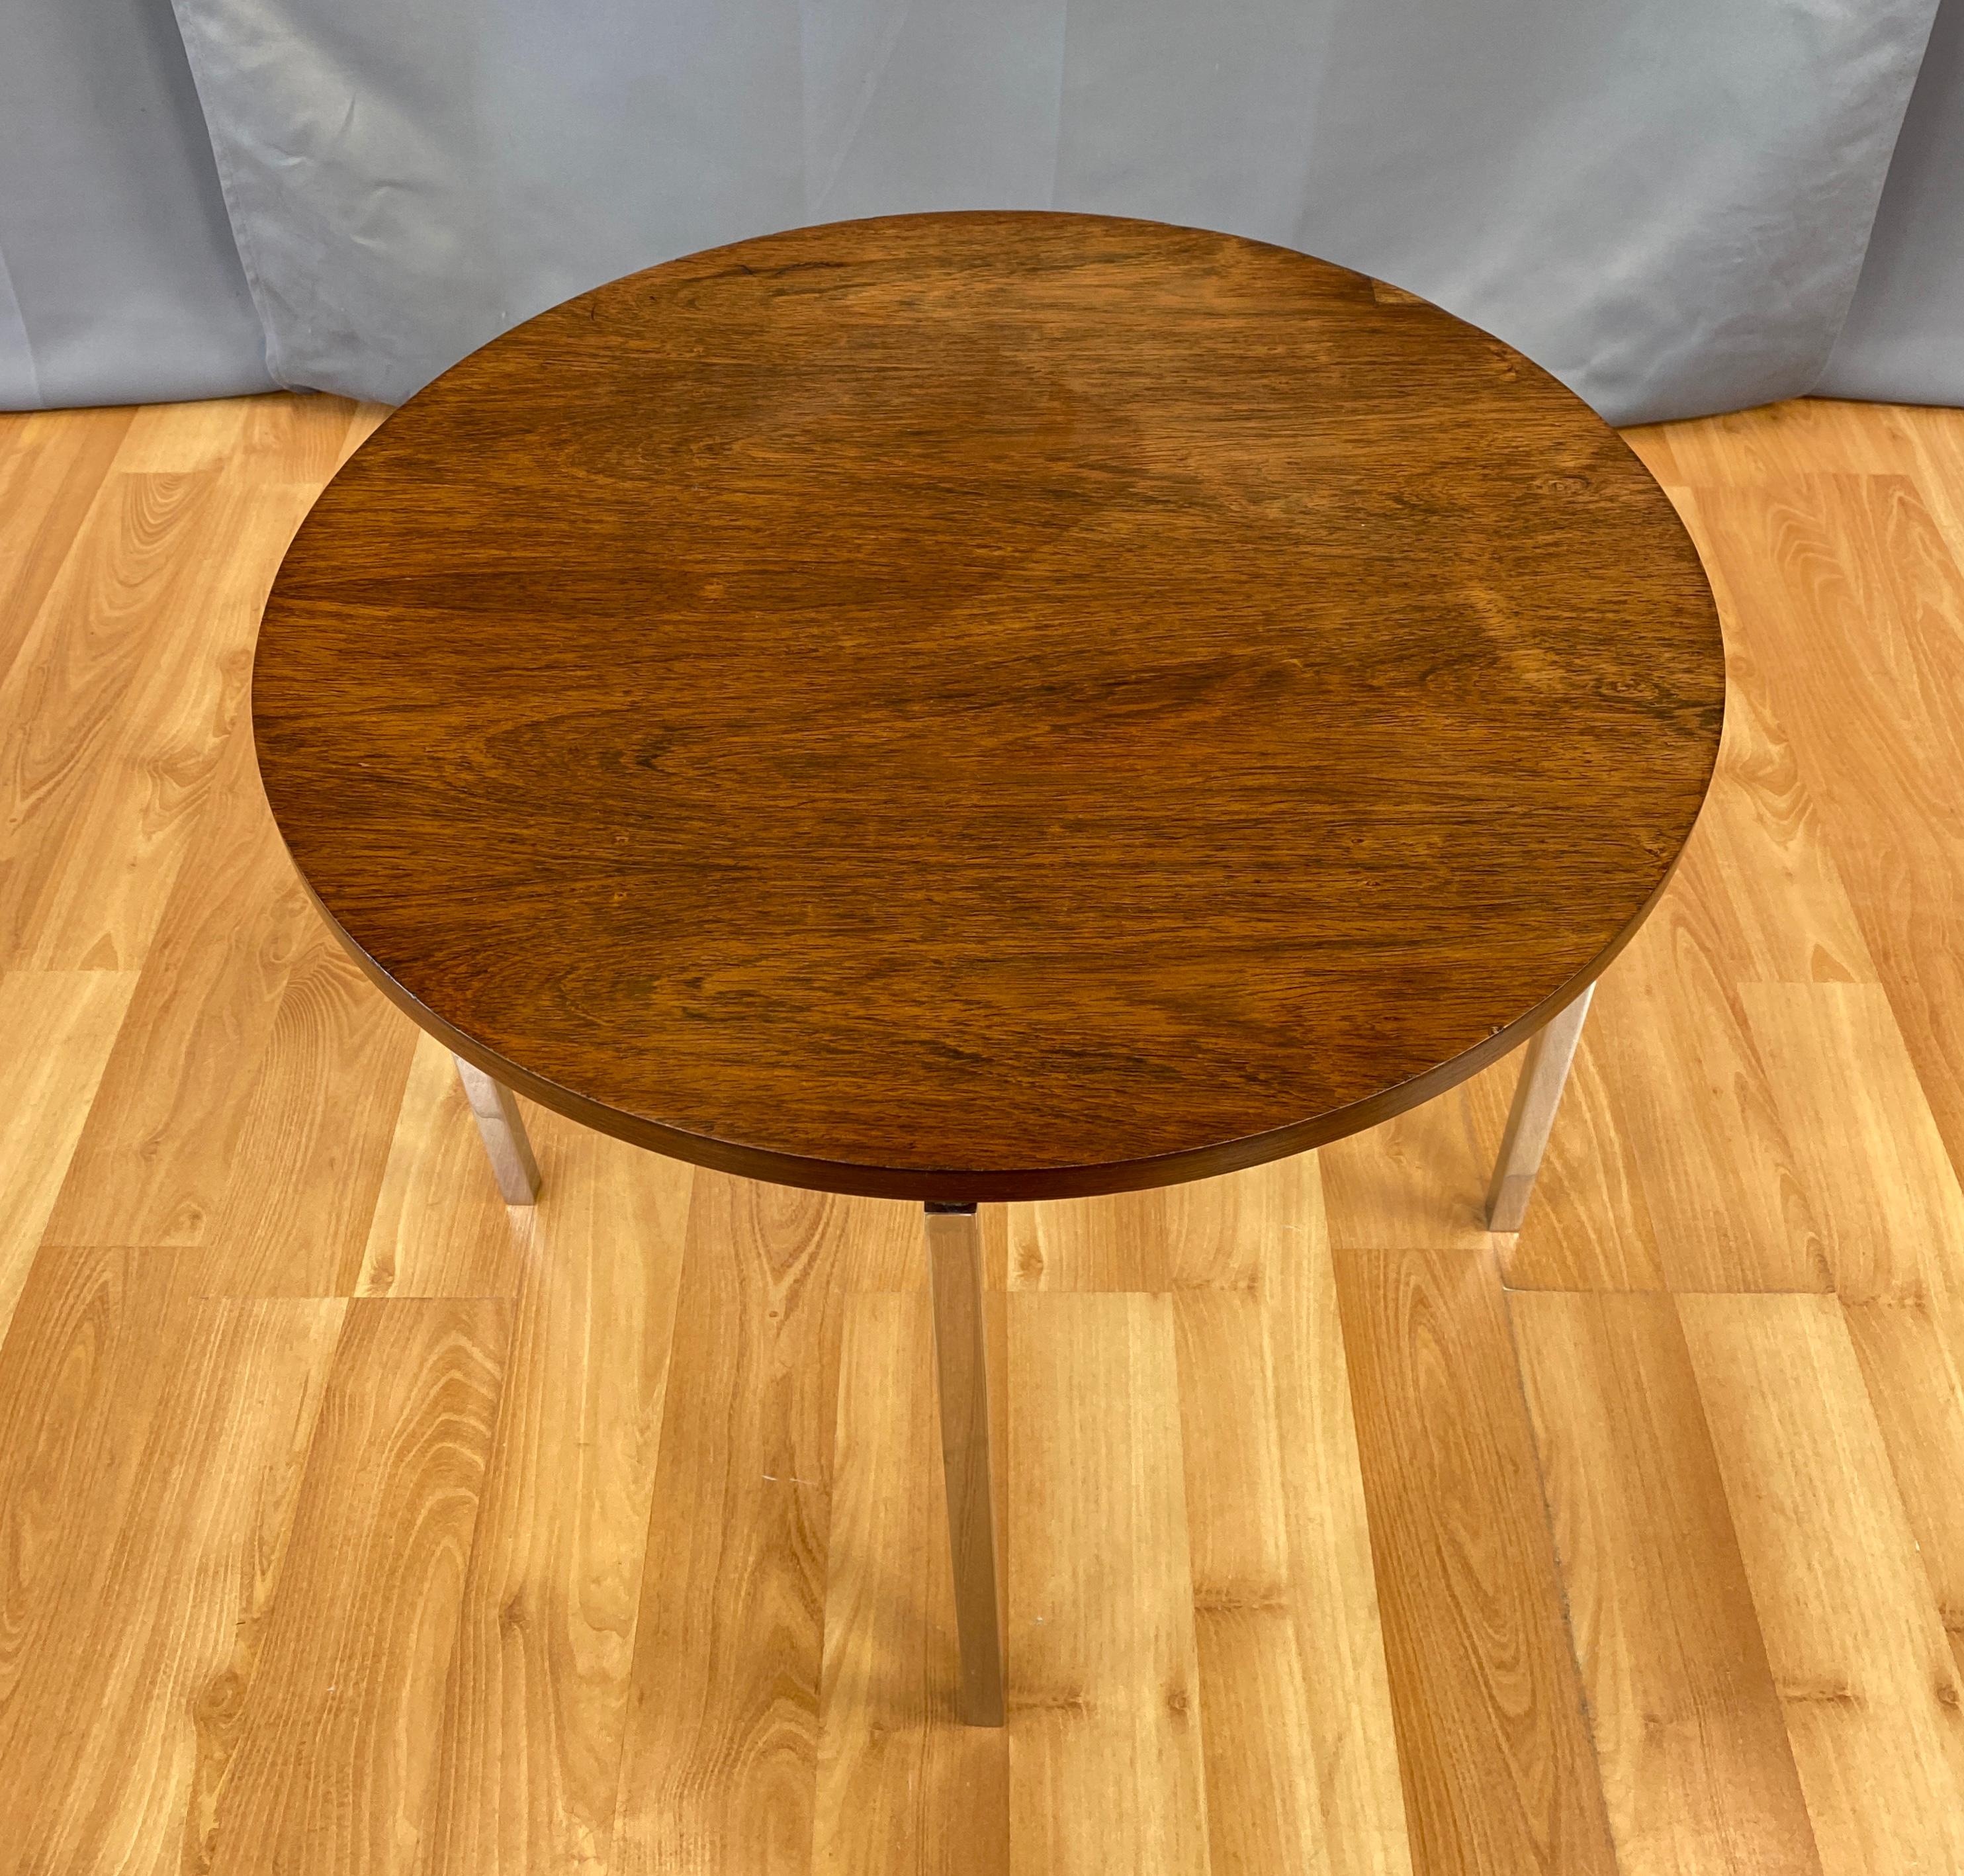 A 1960s round side table in rosewood with polished nickel base by Florence Knoll for Knoll Associates.

One of Knoll’s less commonly found designs, made even more rare by a striking Brazilian rosewood bookmatched veneer finish. Round top floats on a